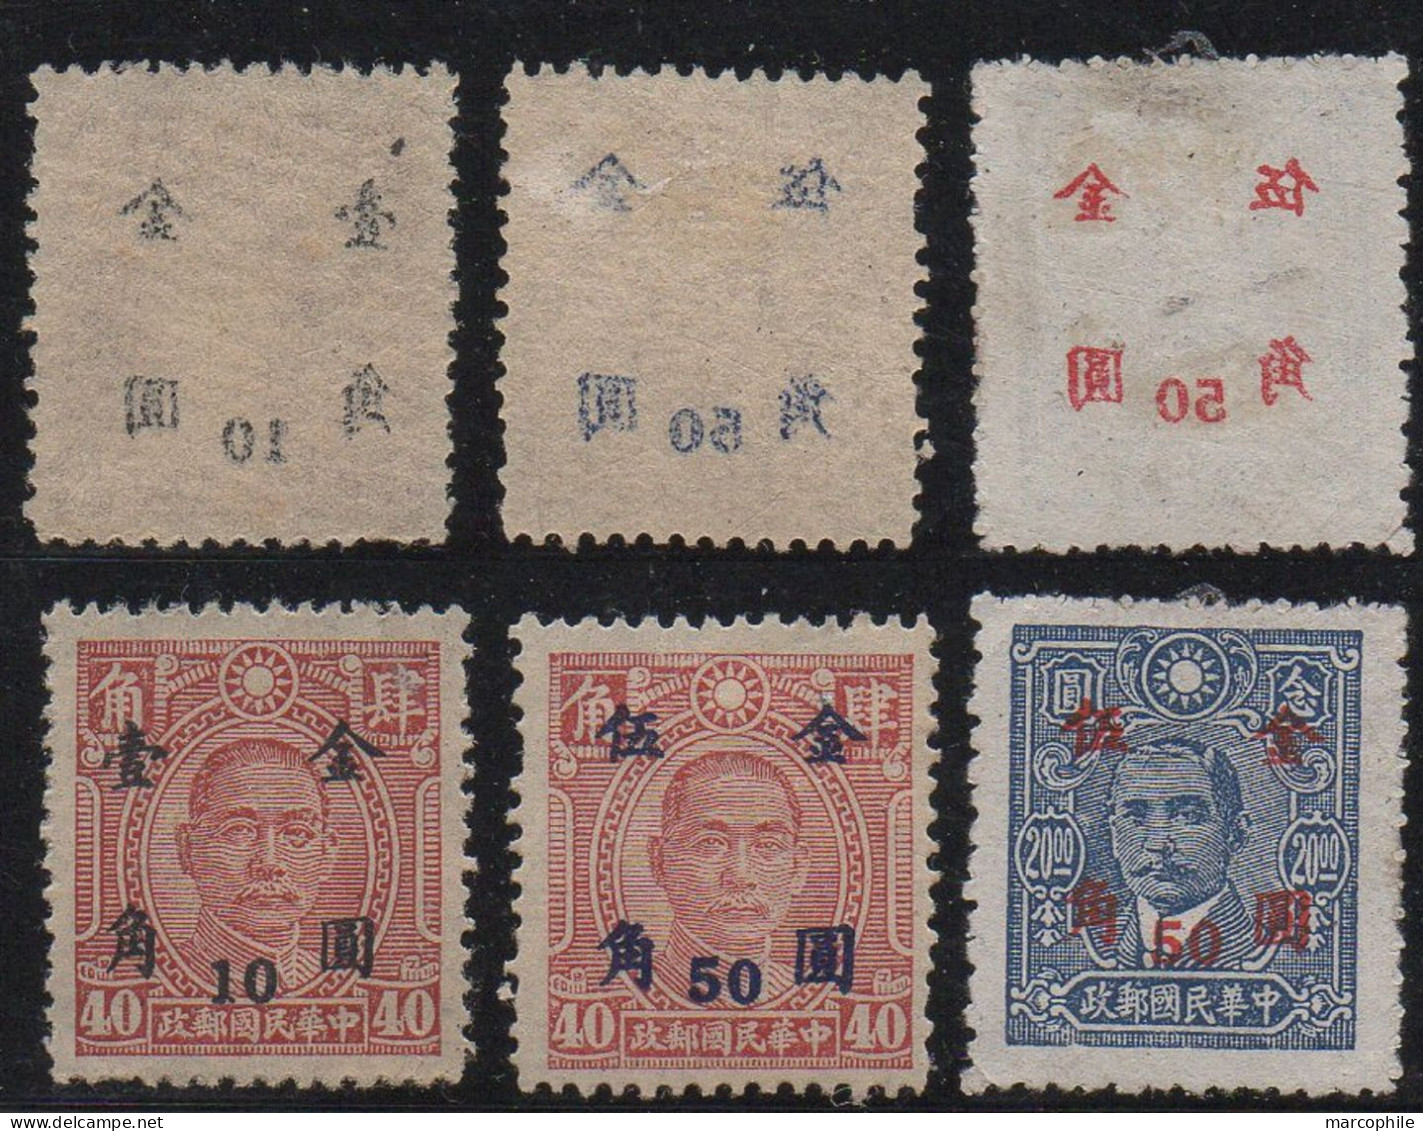 CHINA / 3 STAMPS WITH DOUBLE-SIDED OVERPRINTS (ref T2215) - 1912-1949 Republic